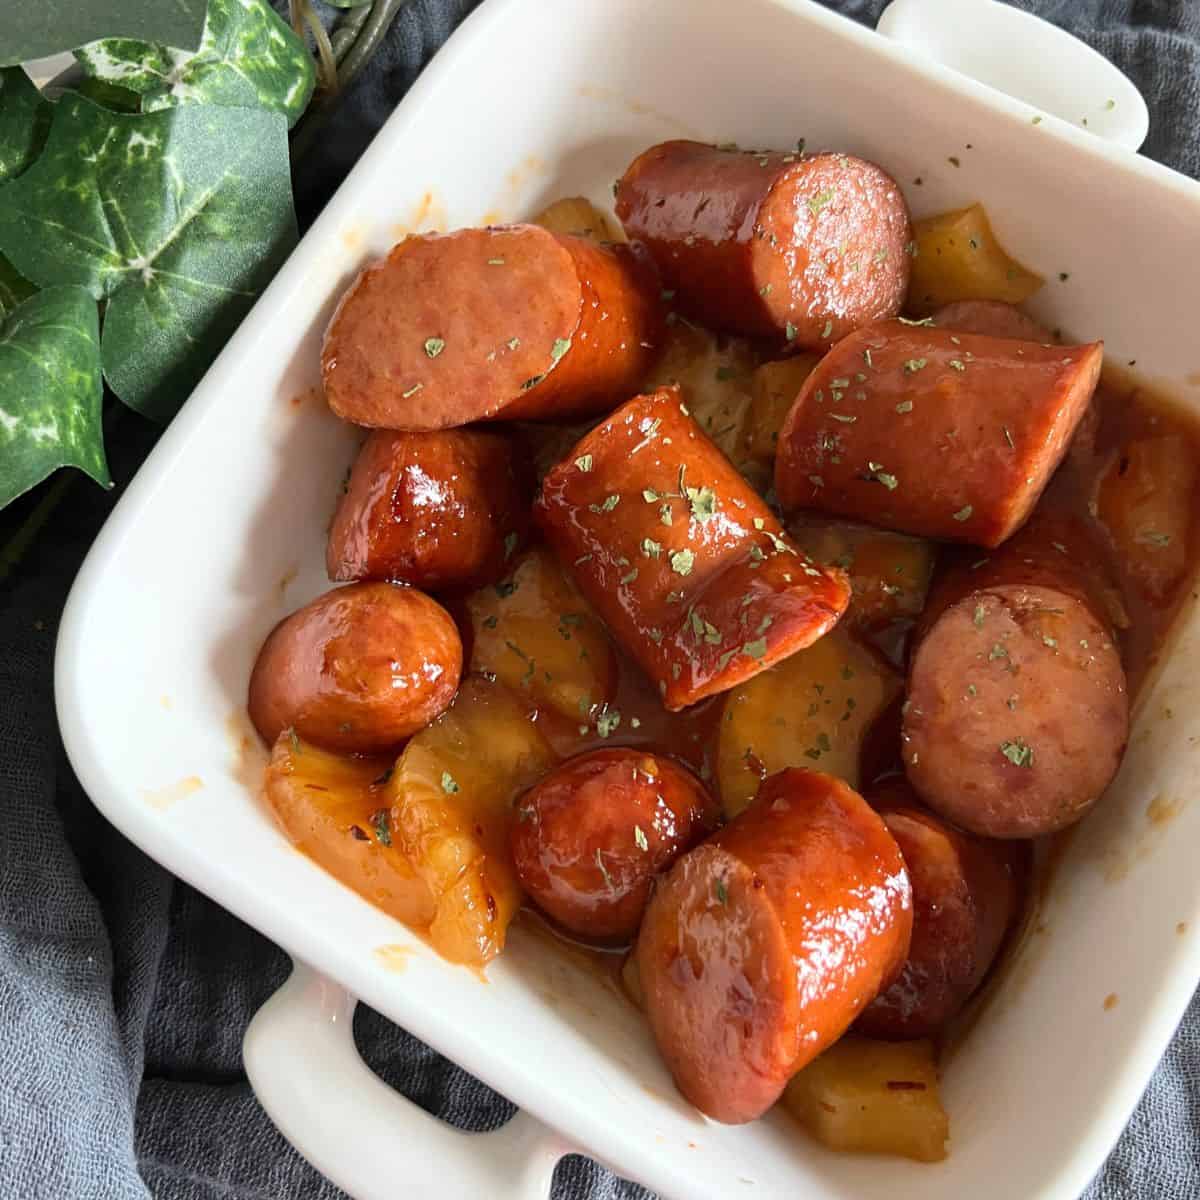 Slow cooker sausage and pineapple is a delicious dish made by combining savory sausage links with sweet pineapple chunks in a slow cooker. 